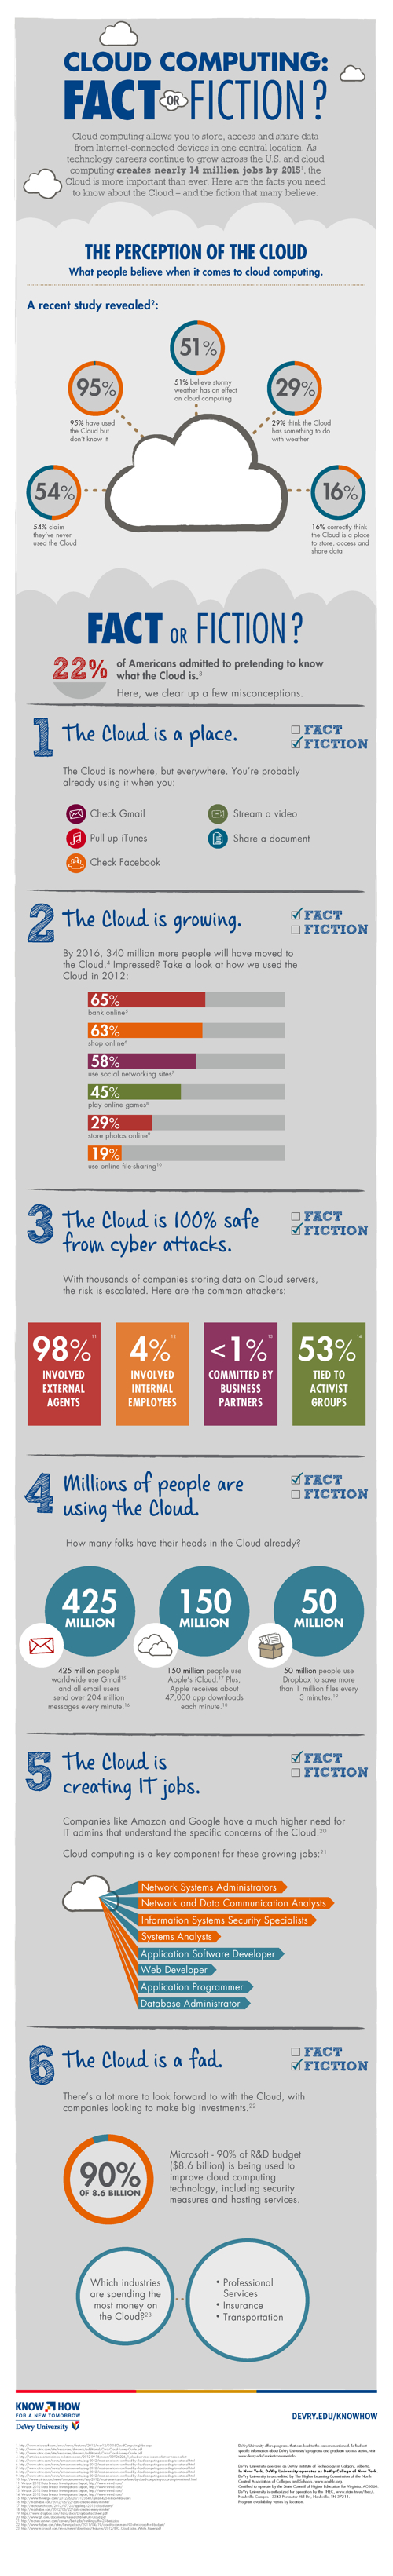 Cloud Computing: Fact or Fiction? infographic